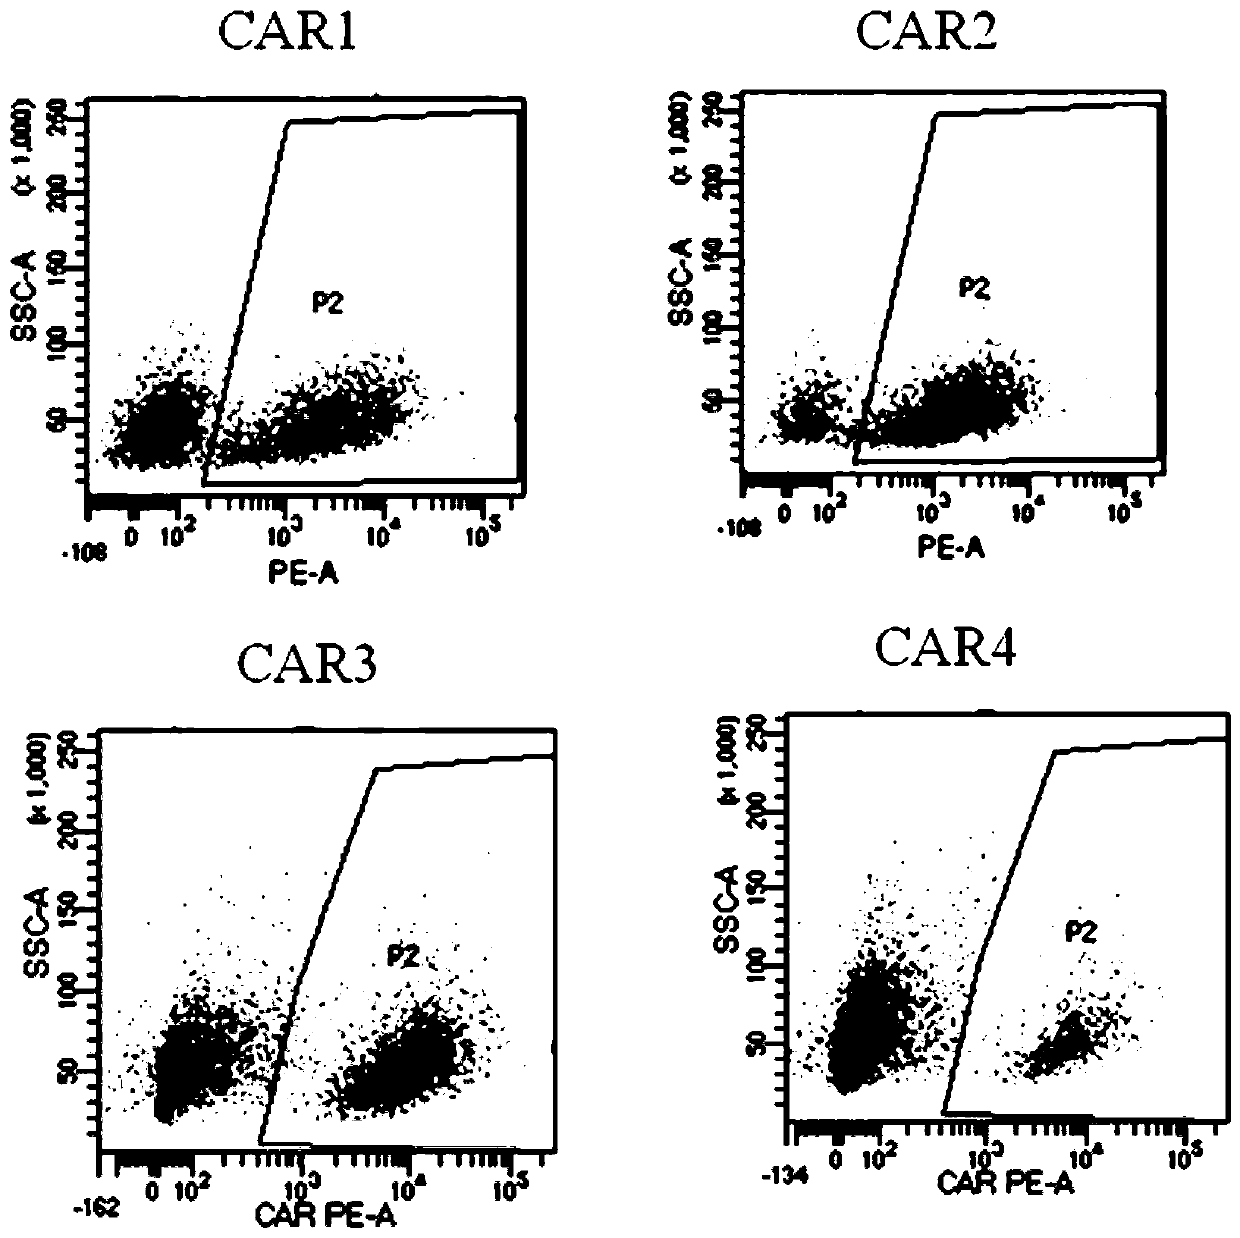 Use of Novel Chimeric Antigen Receptor Modified T Cells for Cancer Therapy